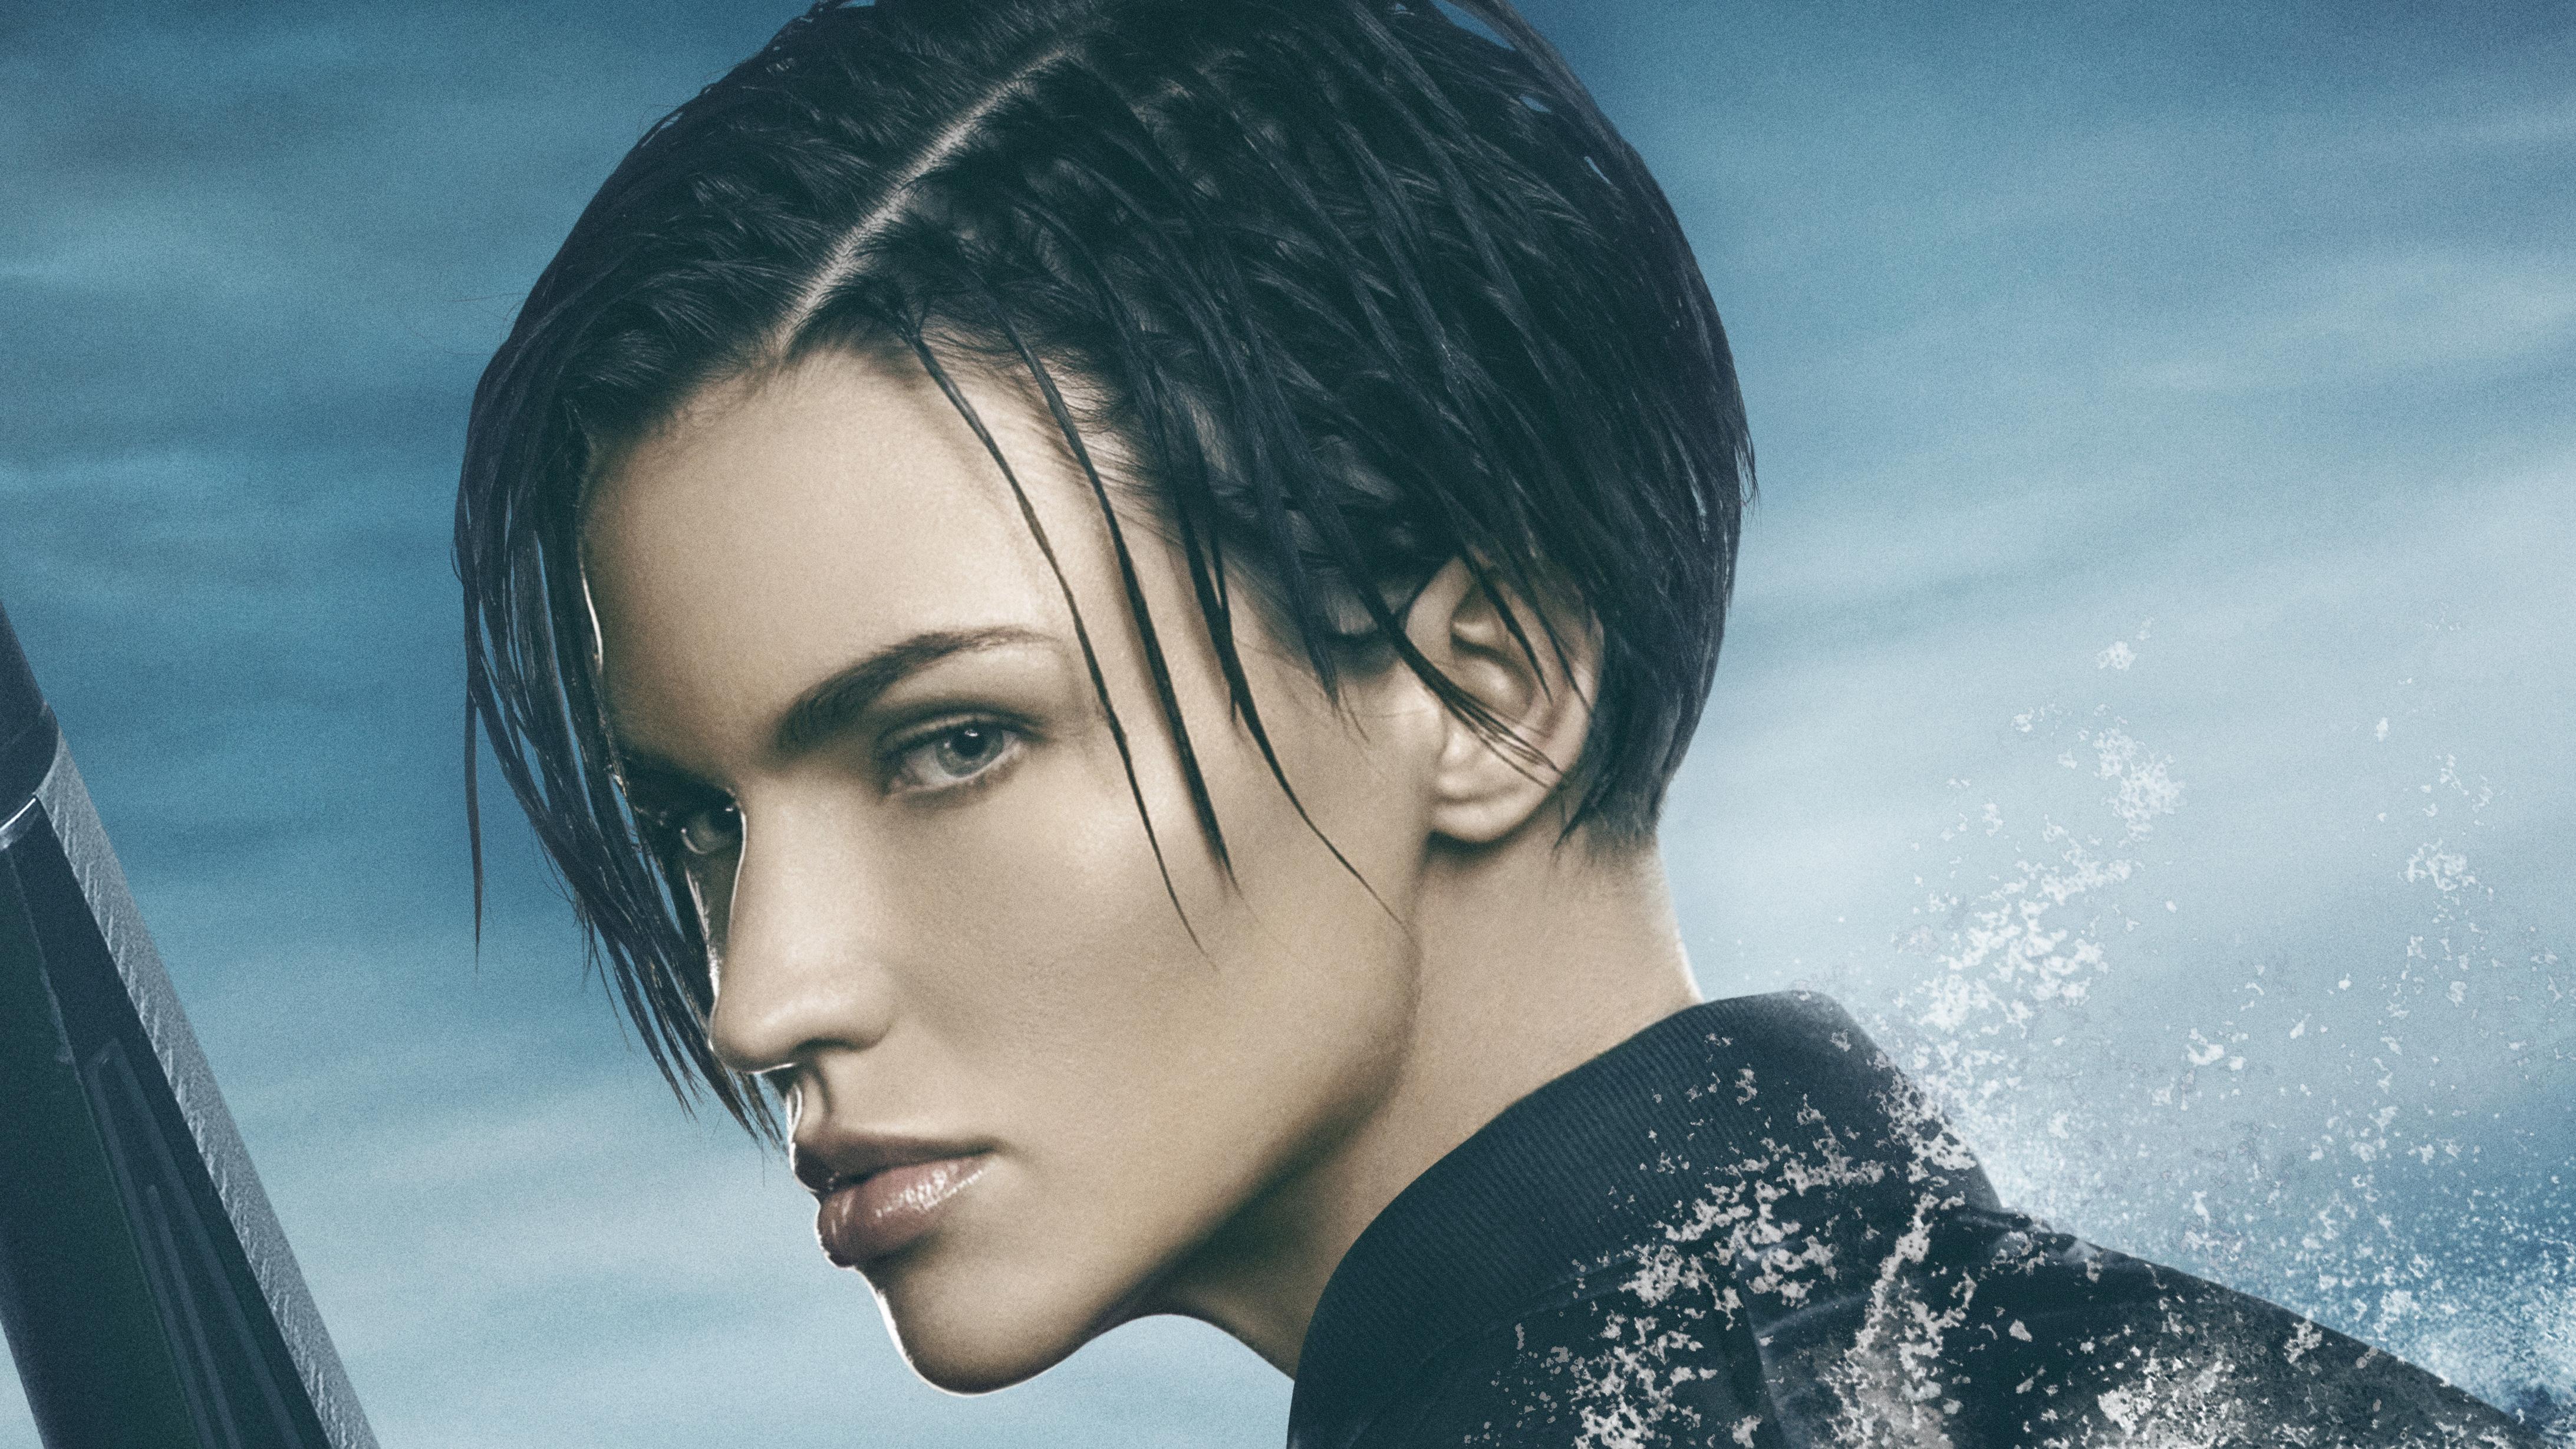 Ruby Rose In The Meg Movie, HD Movies, 4k Wallpaper, Image